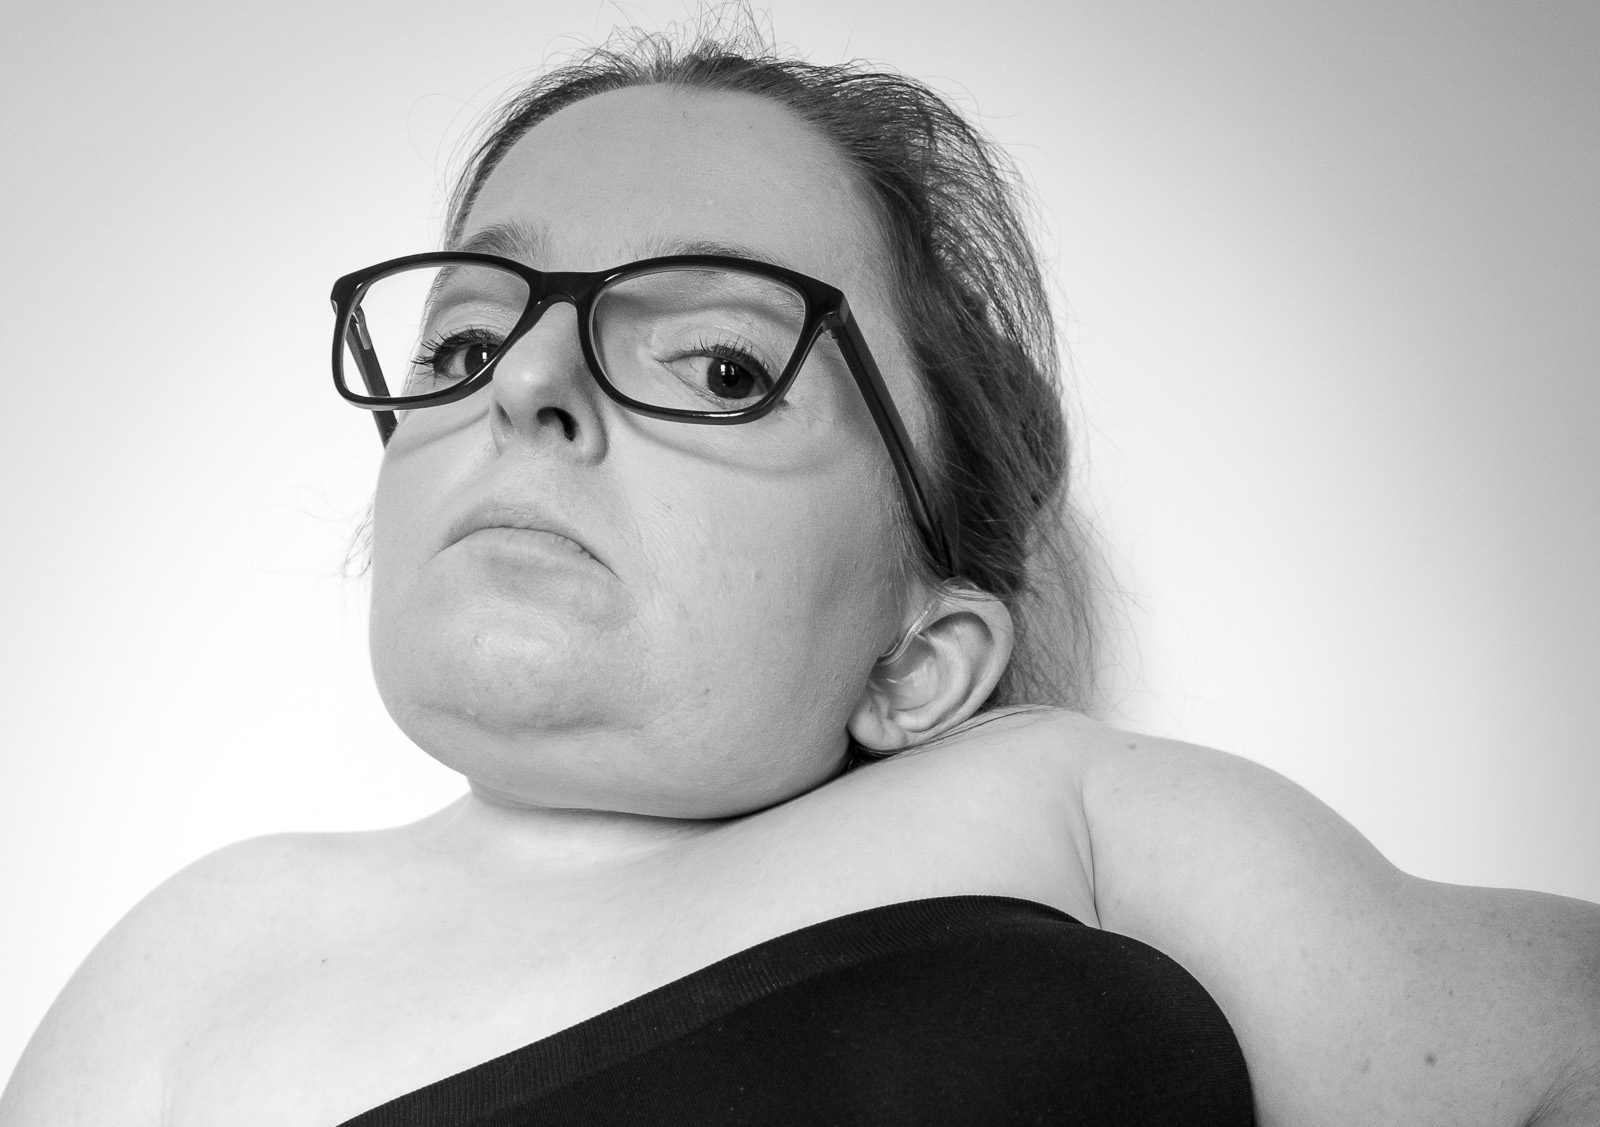 A woman wearing glasses and a strapless top looks into the camera